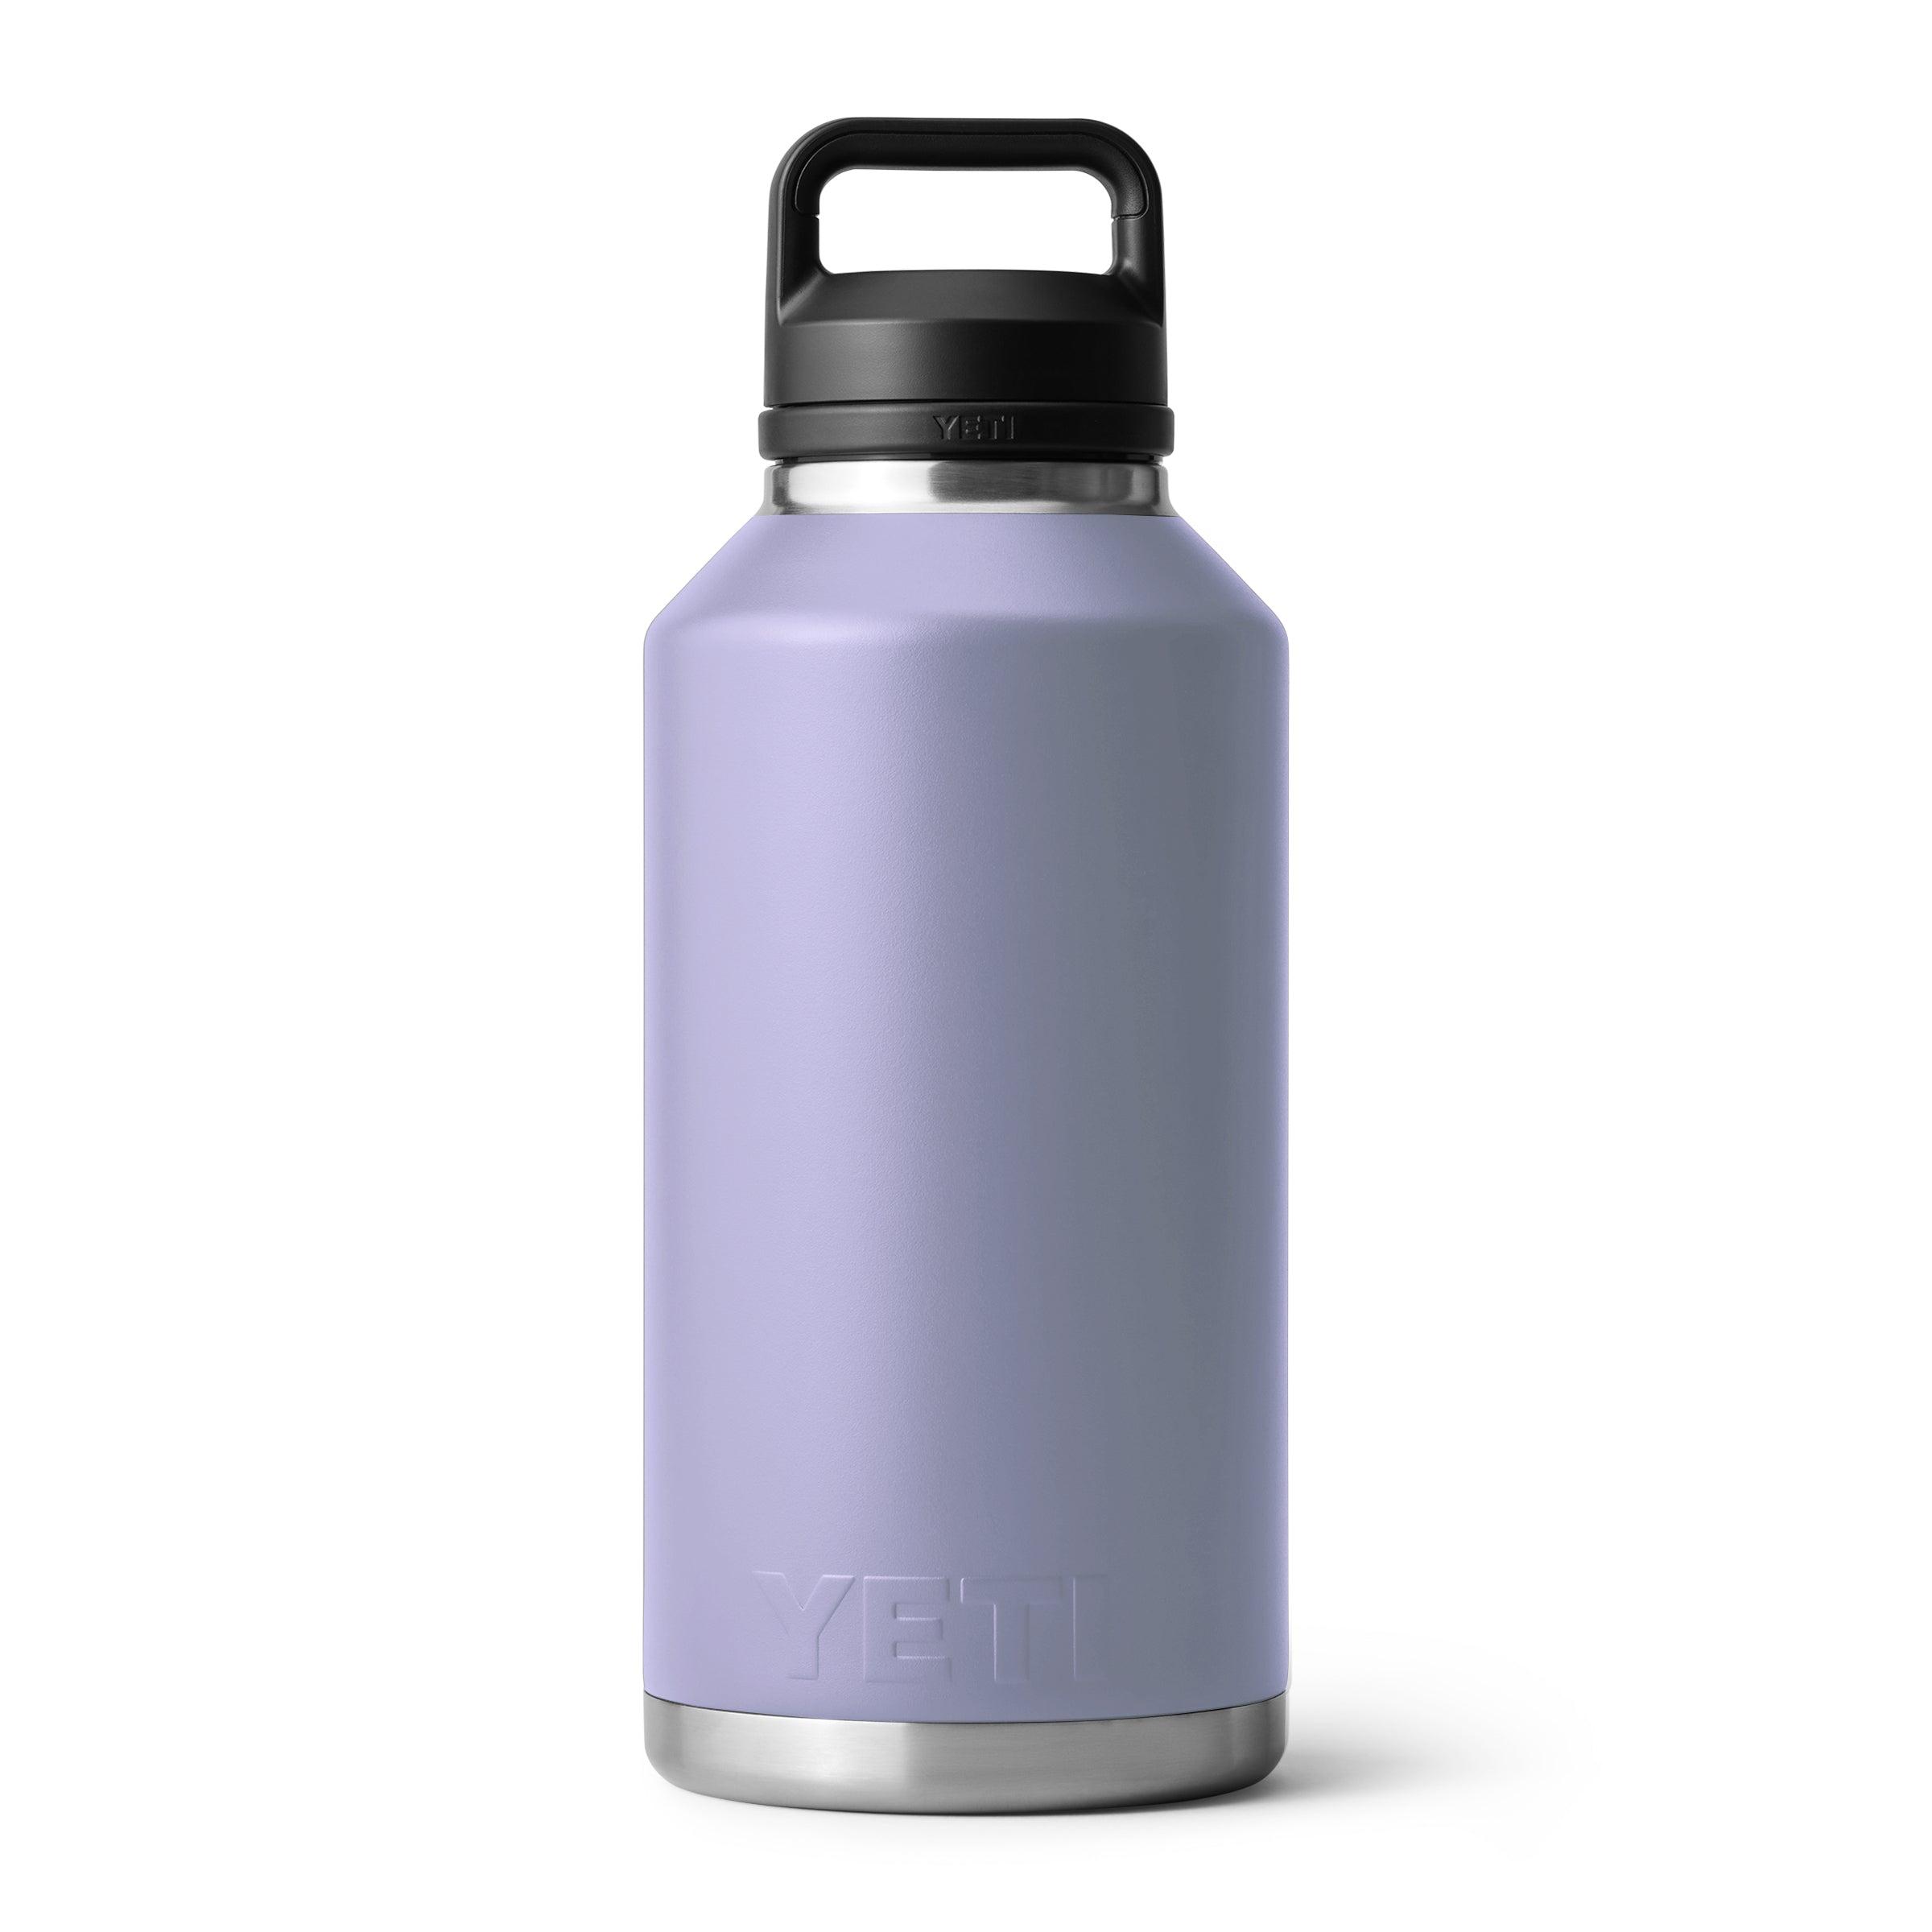 Yeti 64oz Bottle With Chug Cap - 64OZ / COSMIC LILAC - Mansfield Hunting & Fishing - Products to prepare for Corona Virus